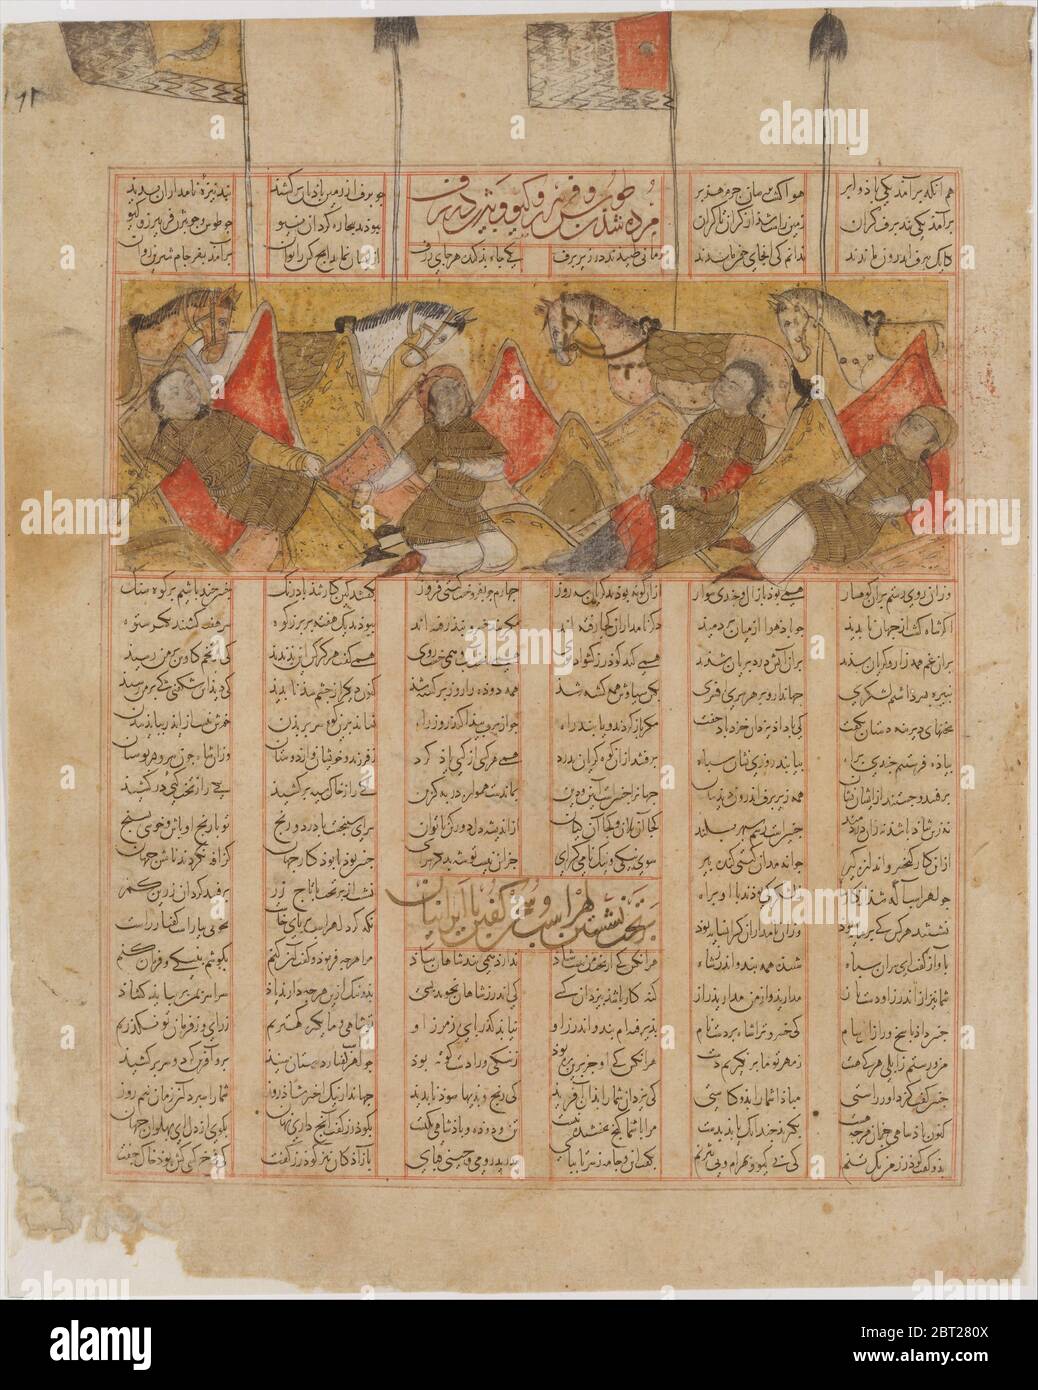 The Four Knights of Kai Khusrau in the Mountains, Folio from a Shahnama (Book of Kings), dated A.H. 741/A.D. 1341. Stock Photo